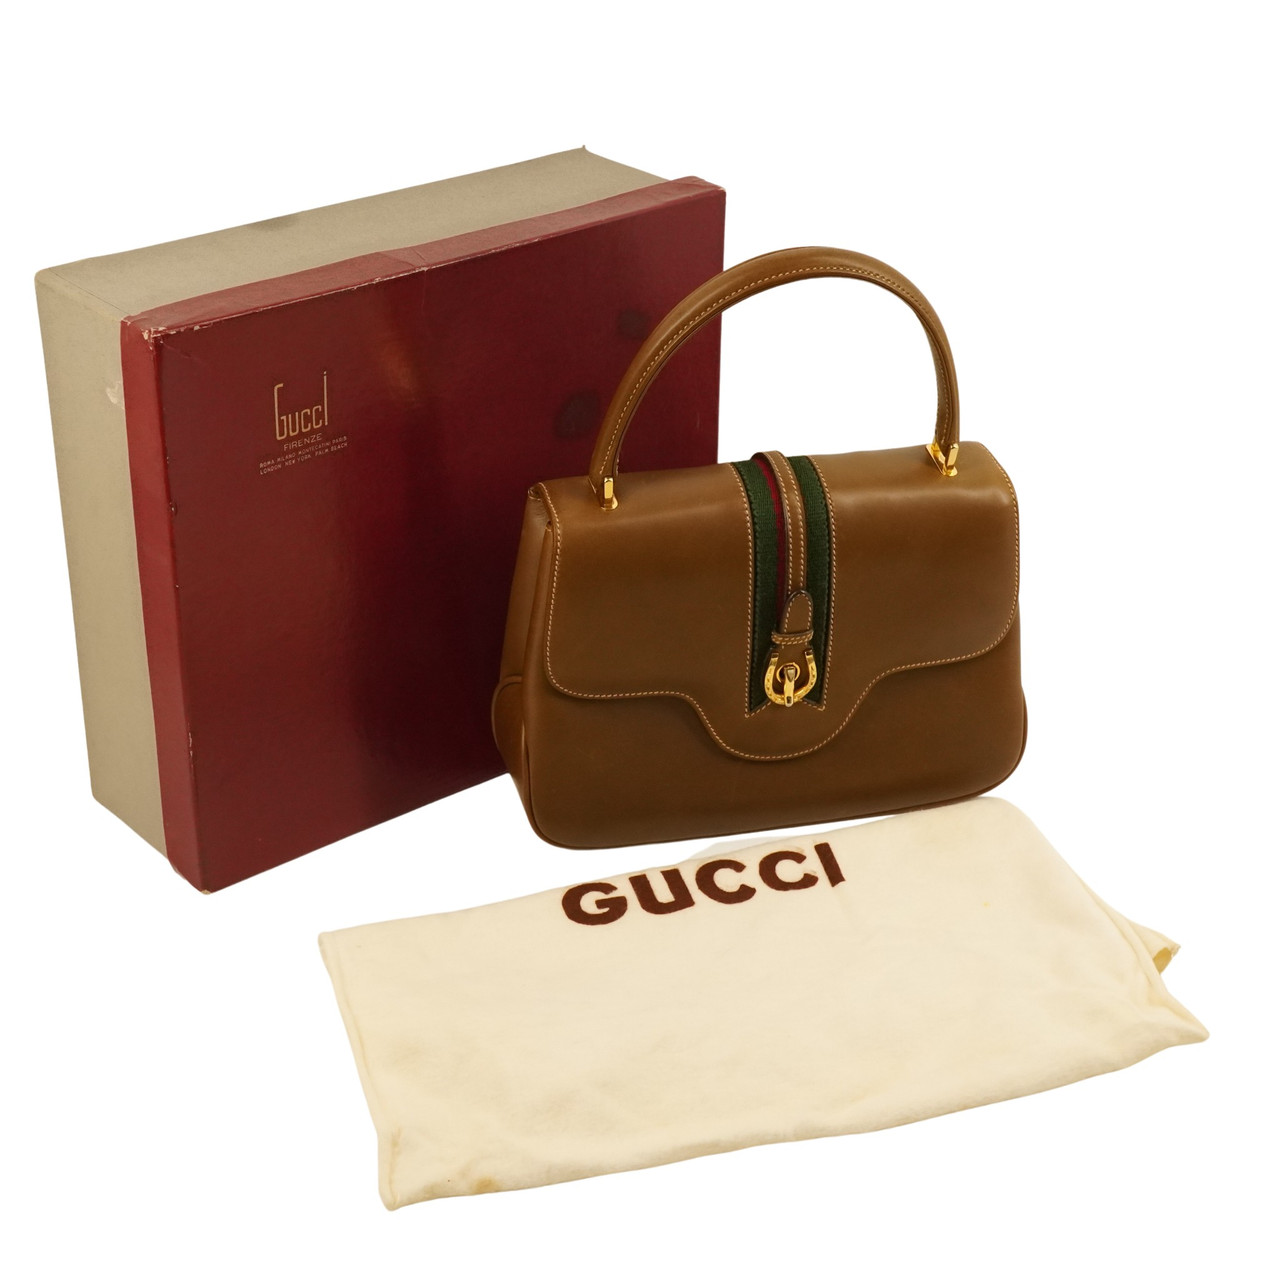 Gucci, Bags, Authentic Gucci Bamboo Tote